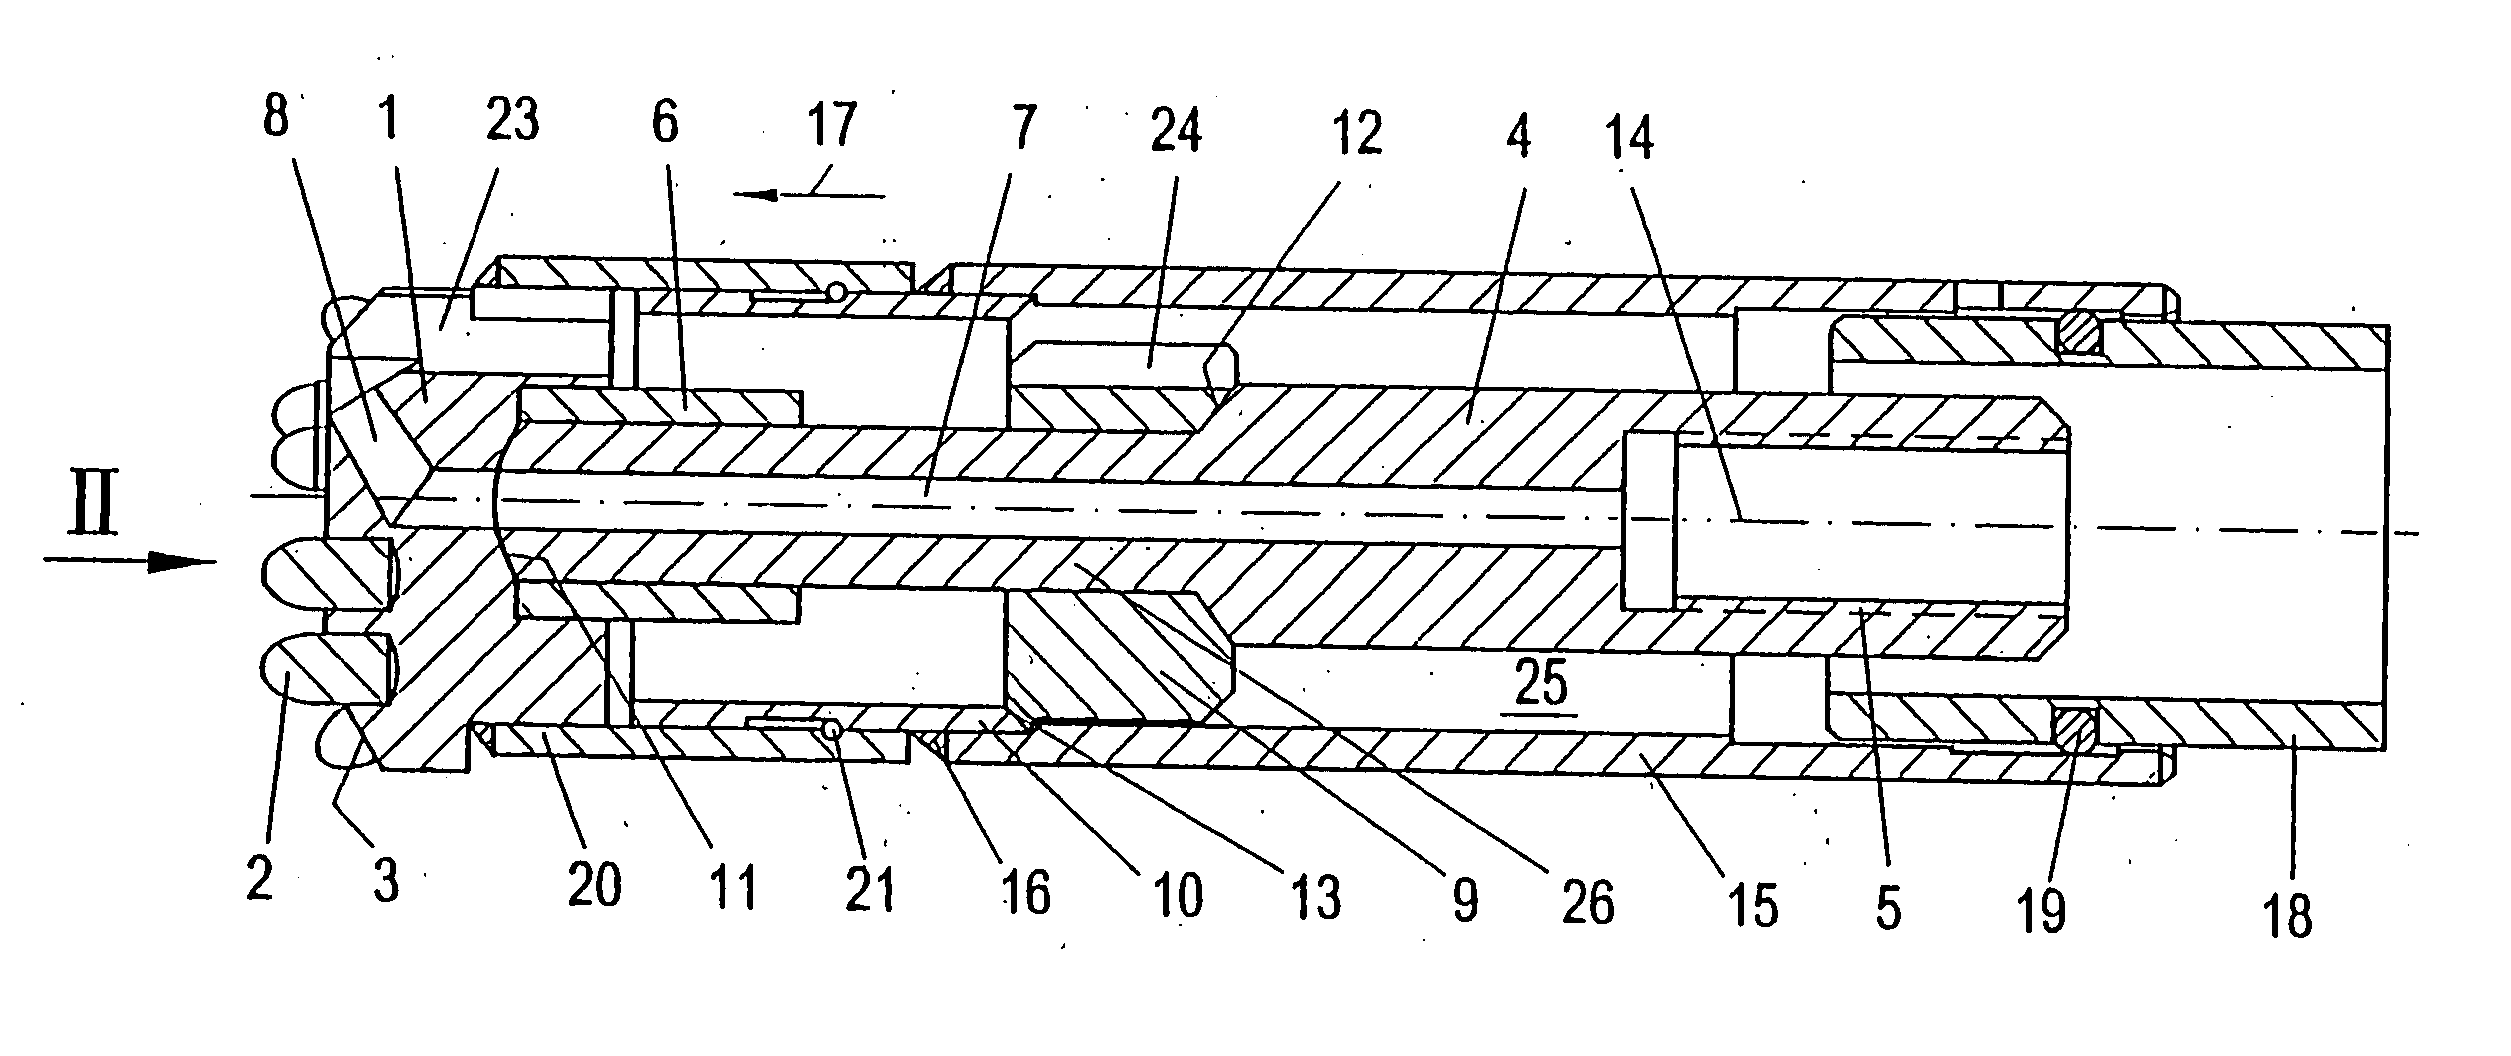 Method and device for the drilling of holes in ground or rocky material